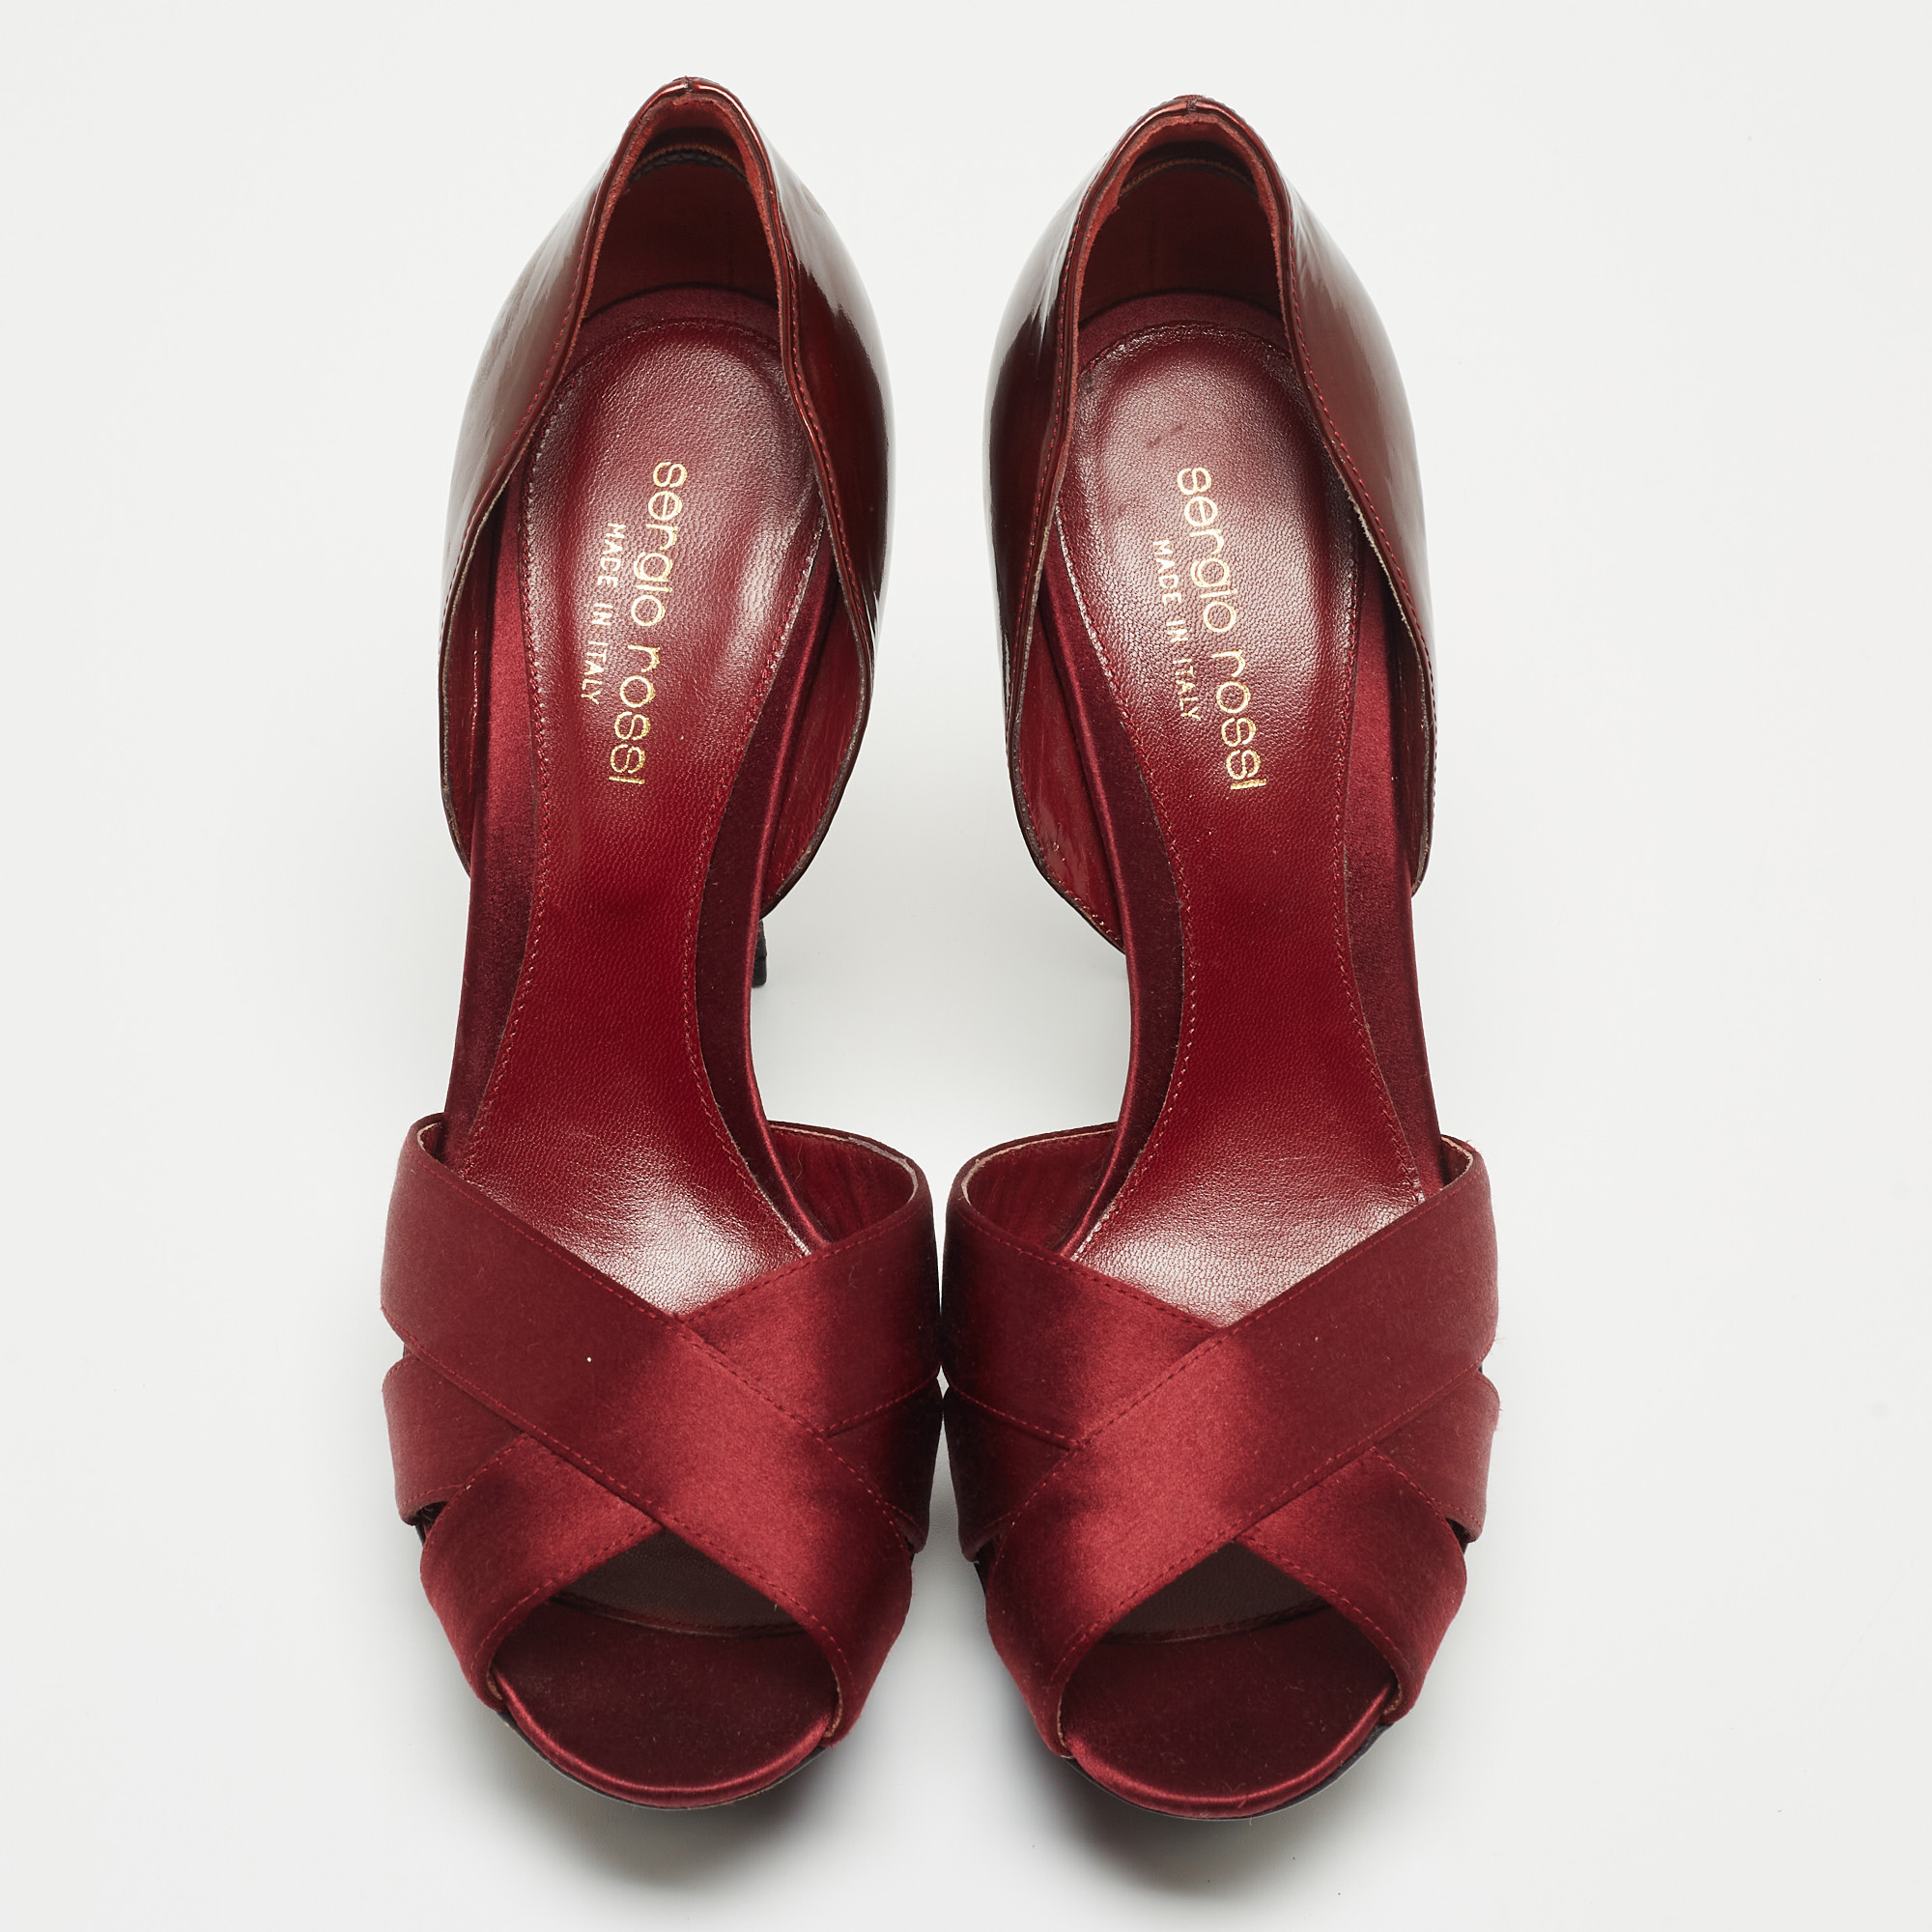 Sergio Rossi Burgundy Satin And Patent Leather Open Toe Platform D'orsay Pumps Size 38